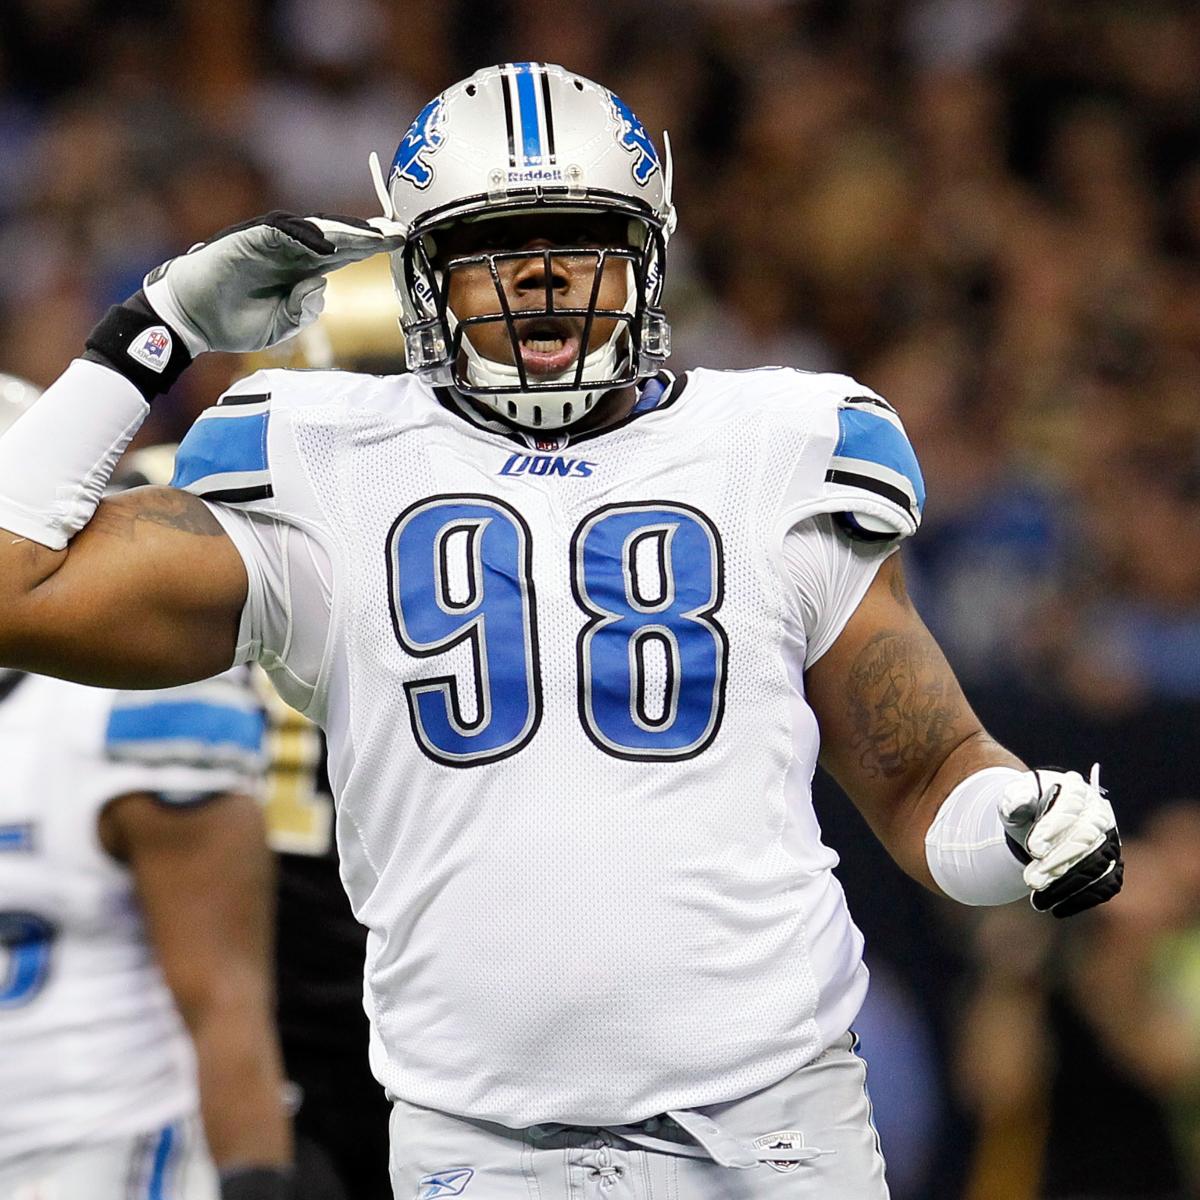 2015 NFL Free Agents Rumors, Predictions for Top Defensive Players